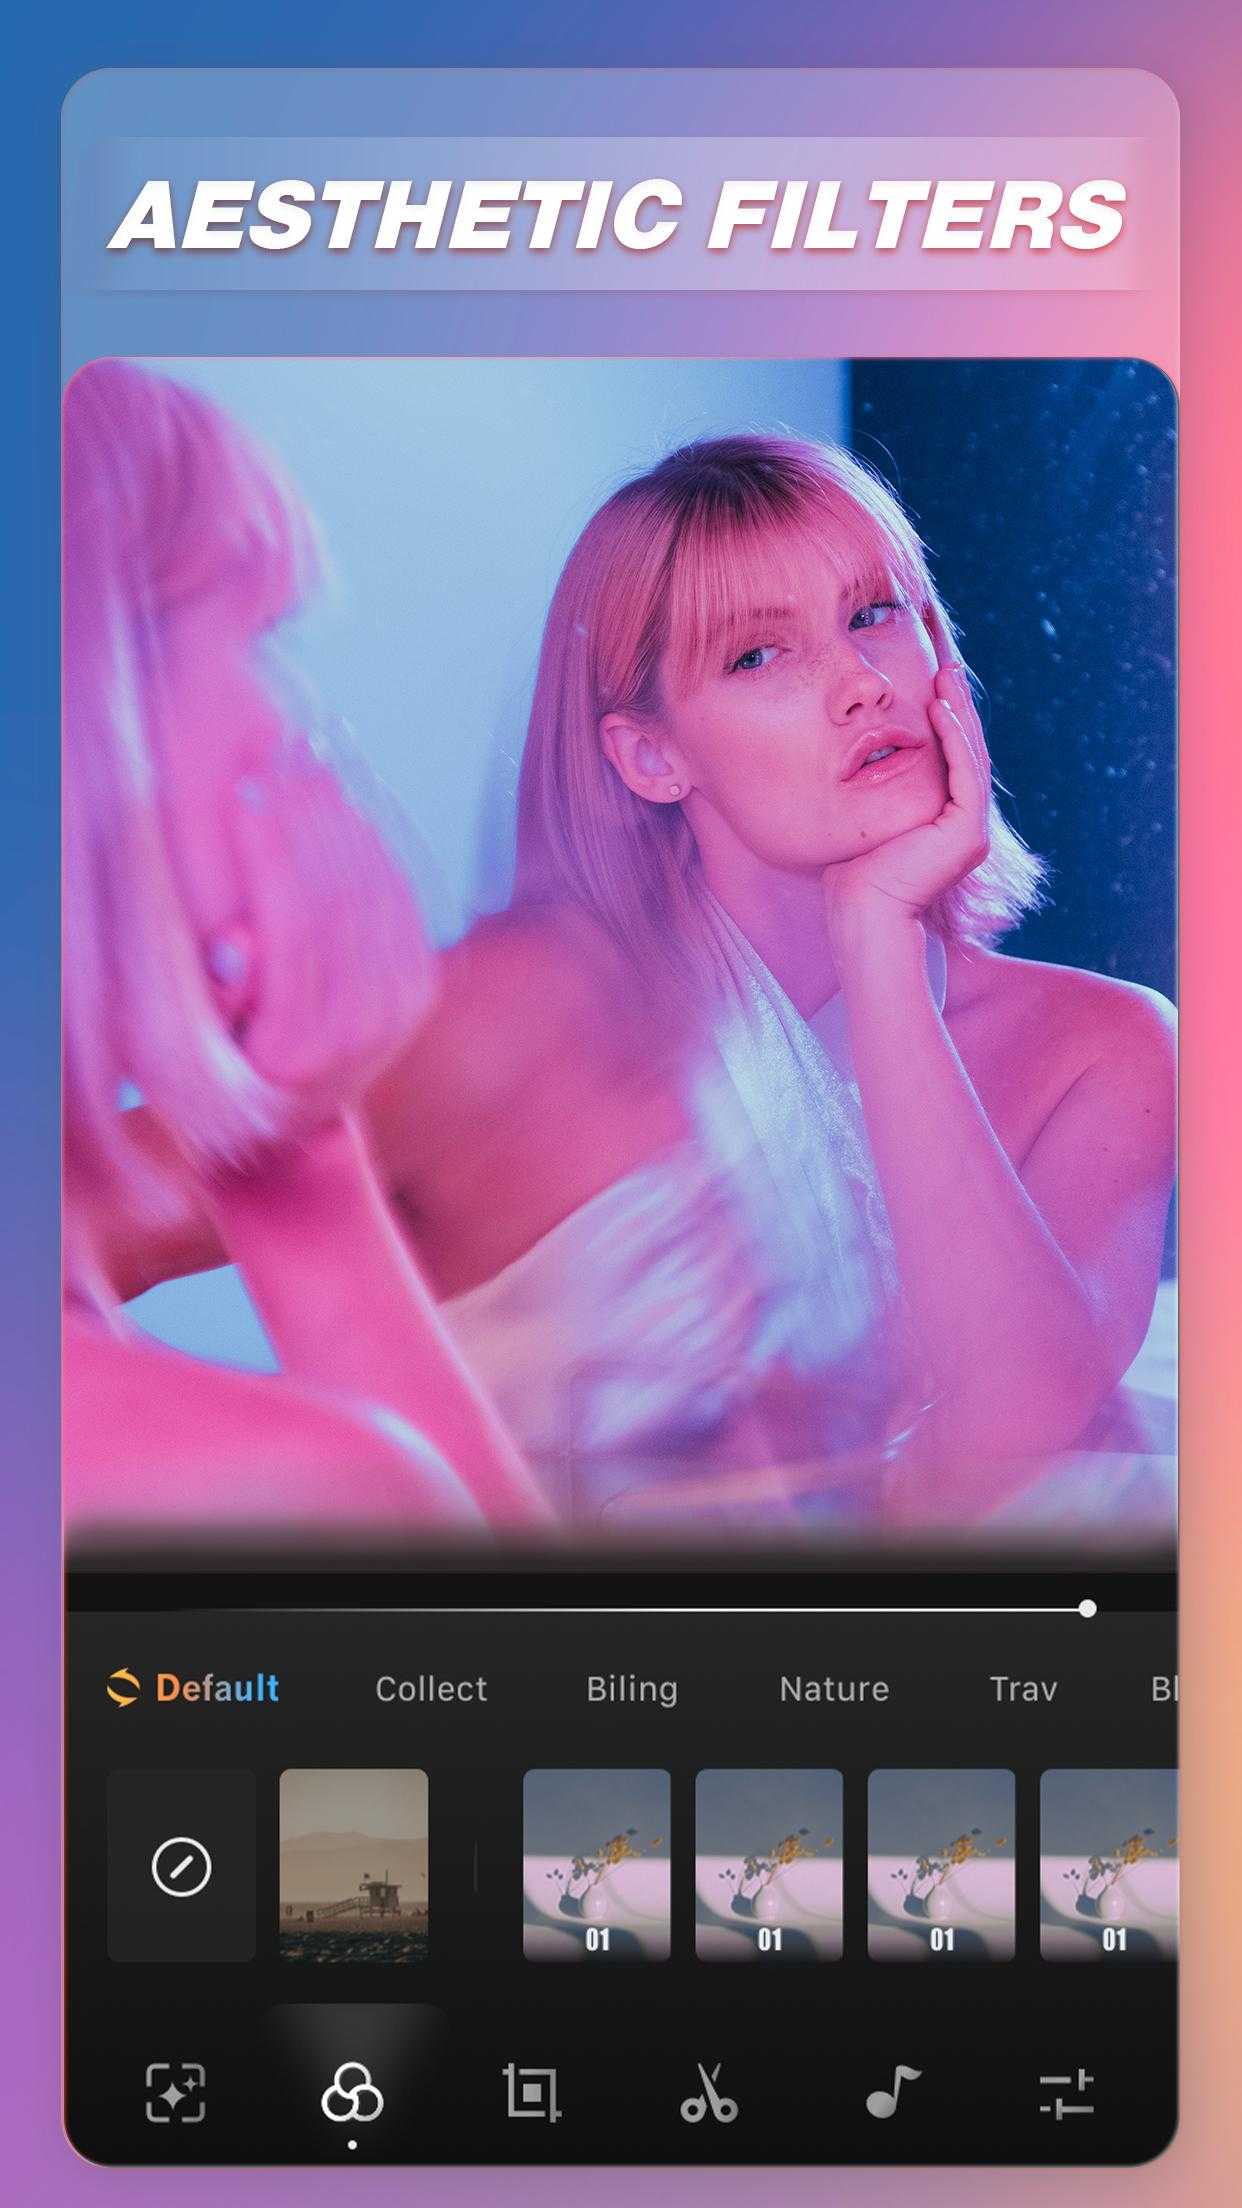 Video Effects & Aesthetic Filter Editor – Fito.ly v2.4.94 (Premium) (Mod) APK